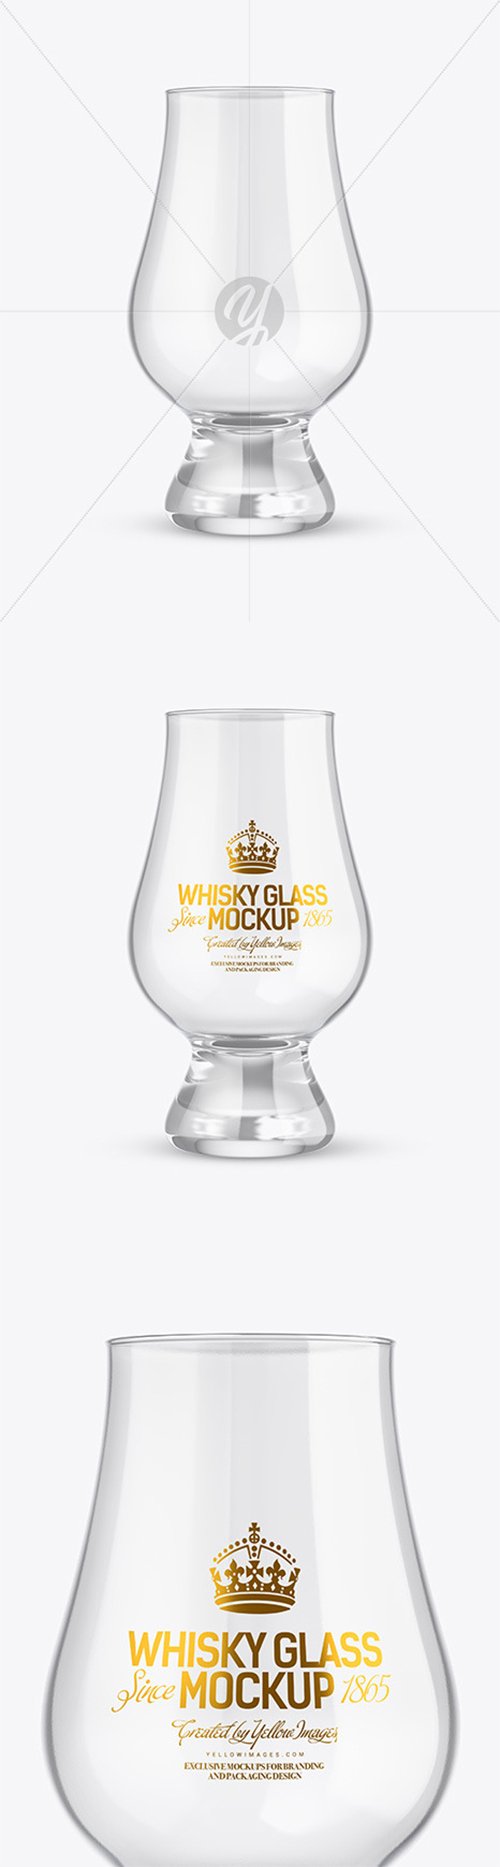 Clear Whisky Glass Mockup 54141 TIF